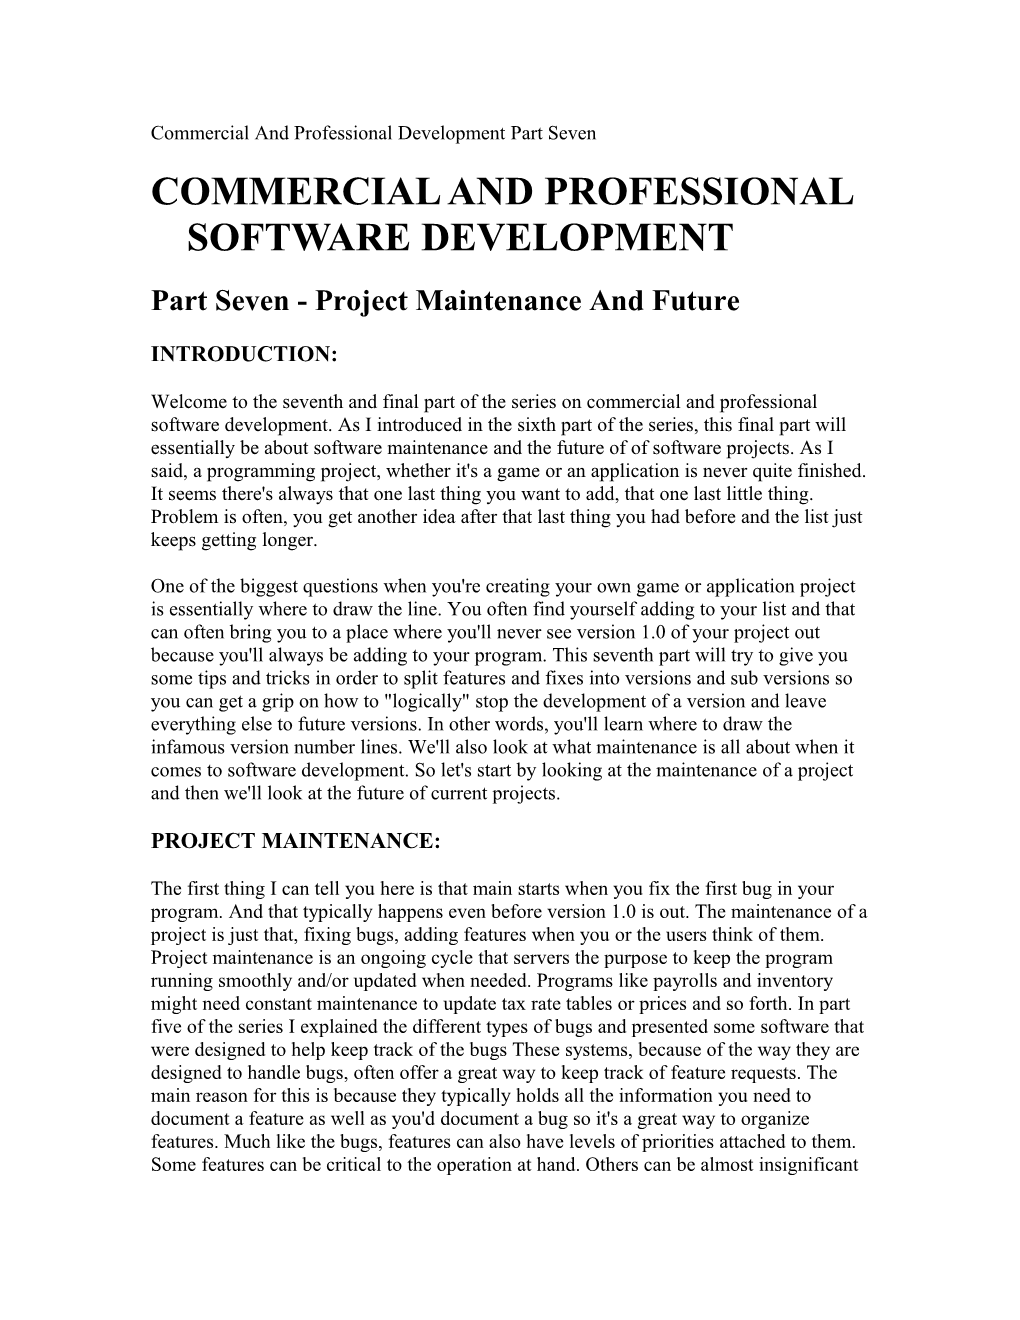 Commercial and Professional Development Part Seven